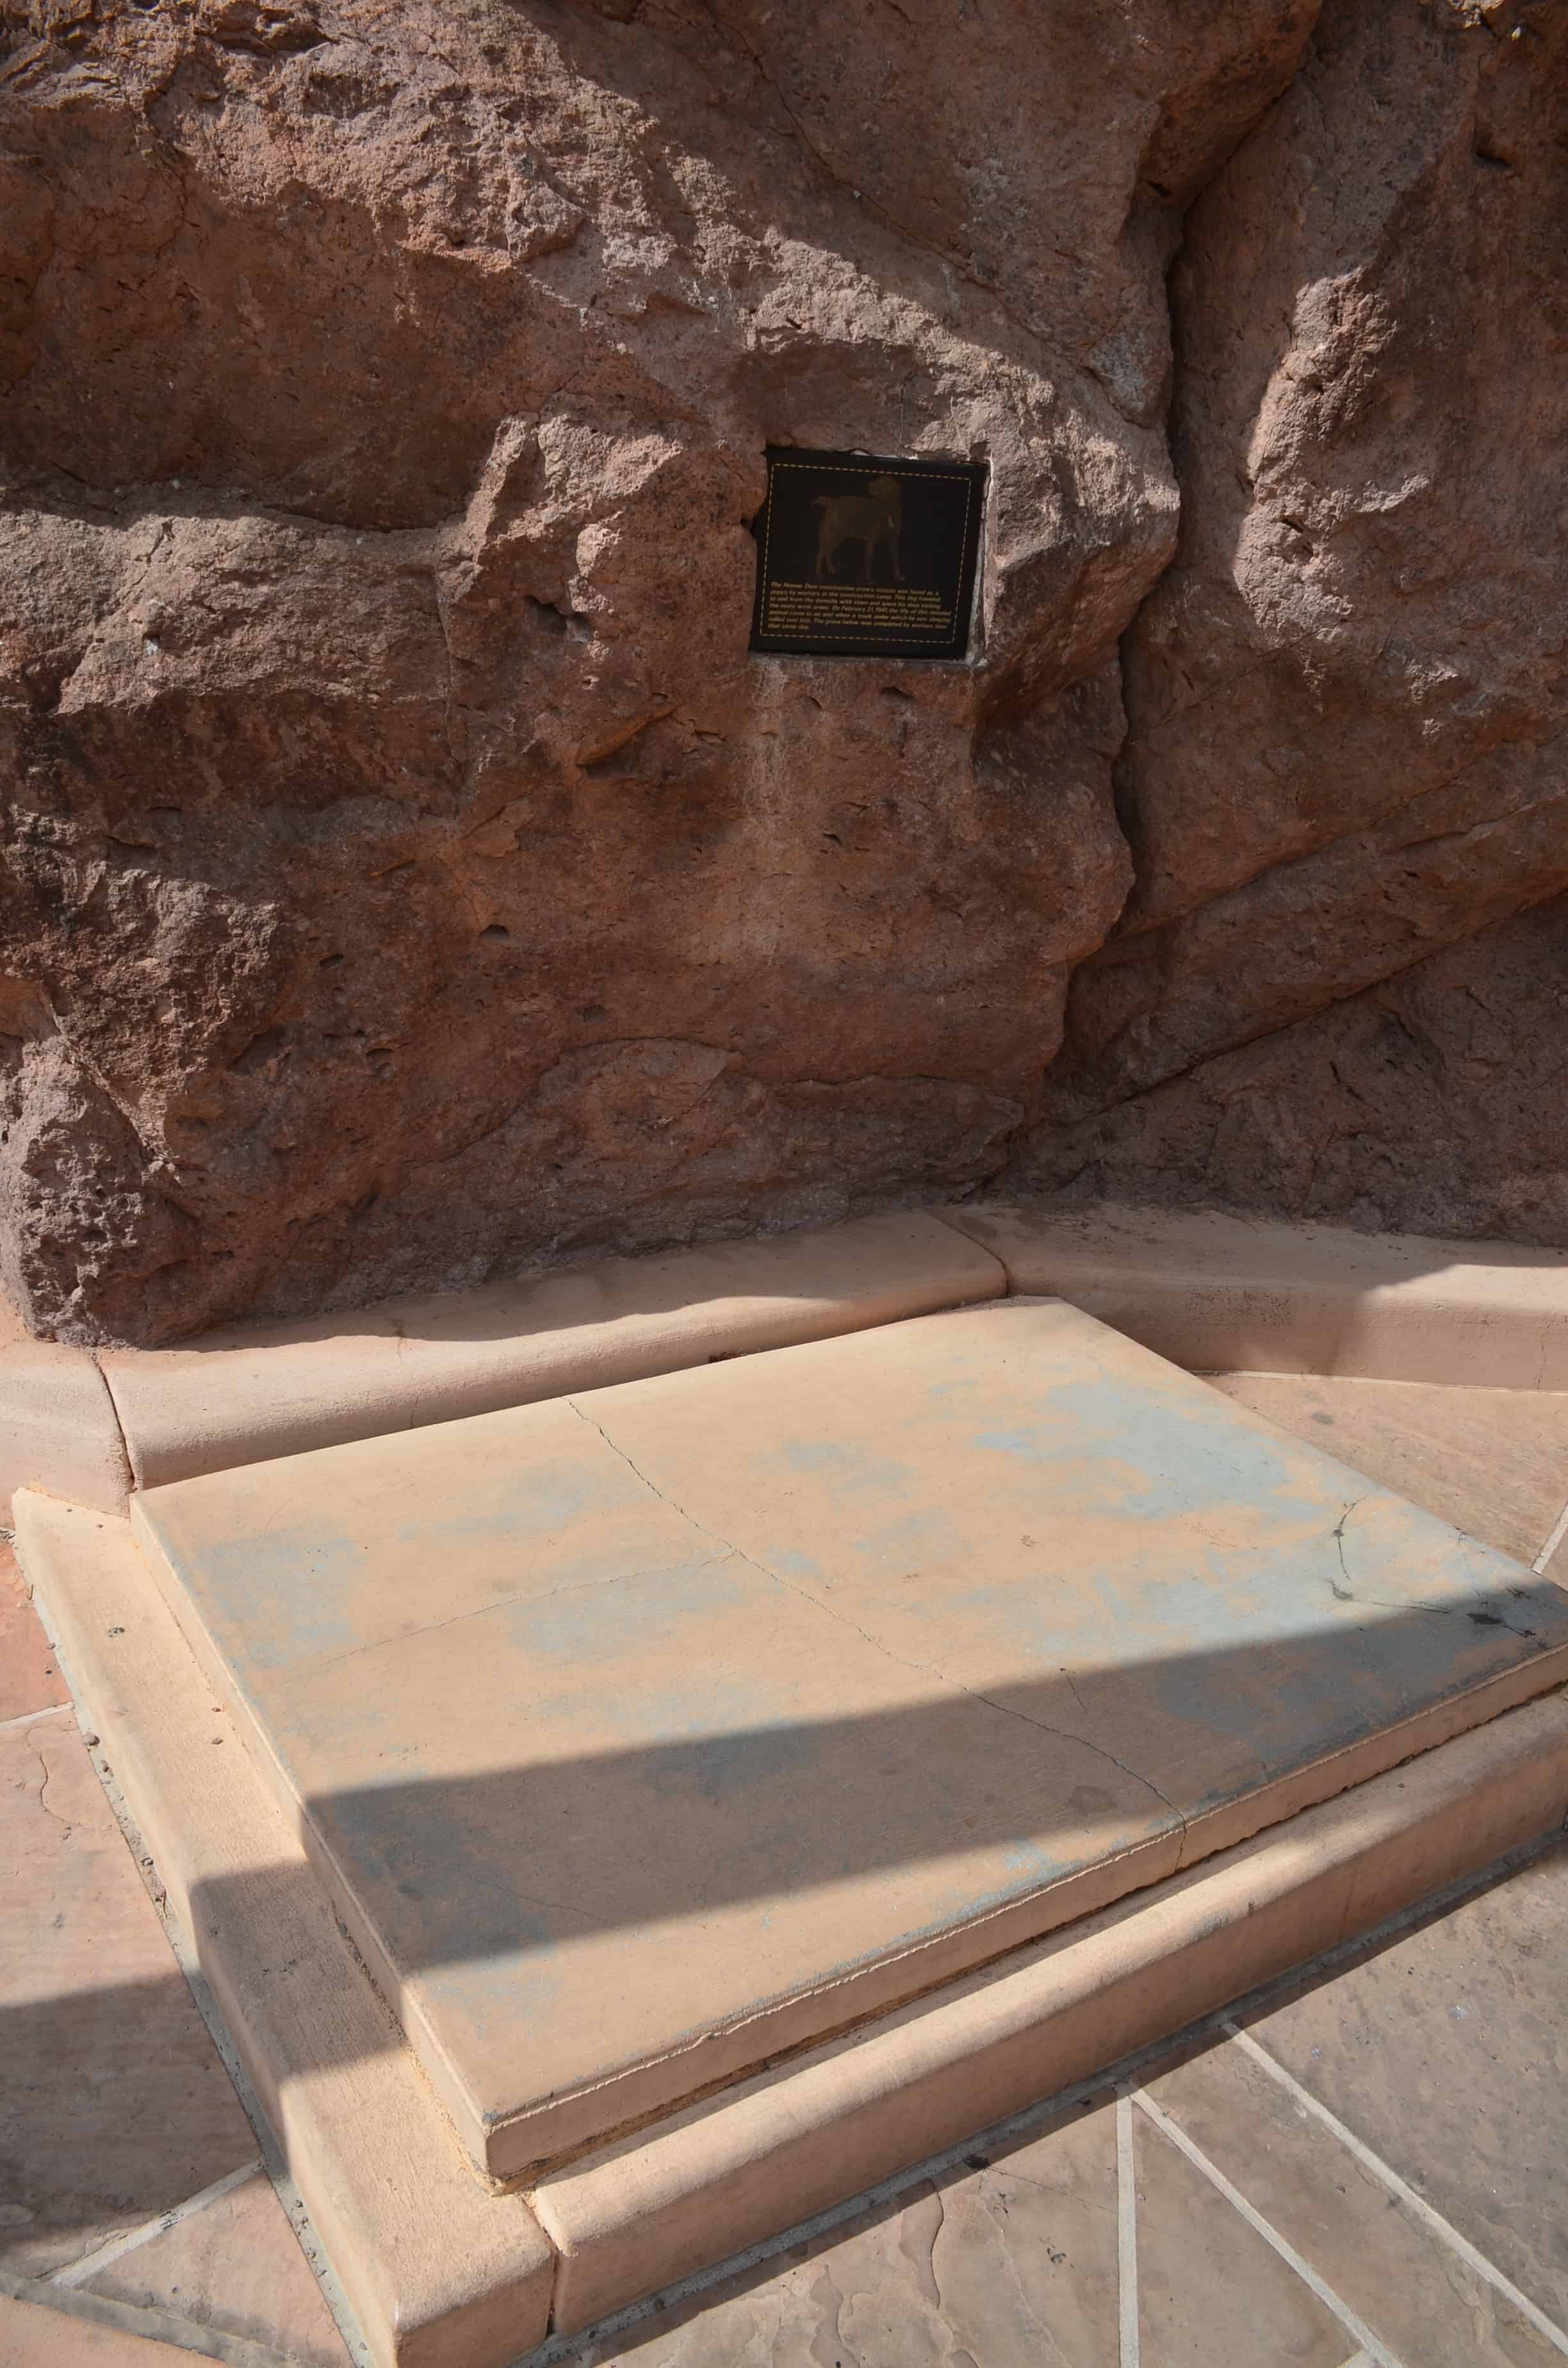 Mascot's tomb at Hoover Dam in Nevada